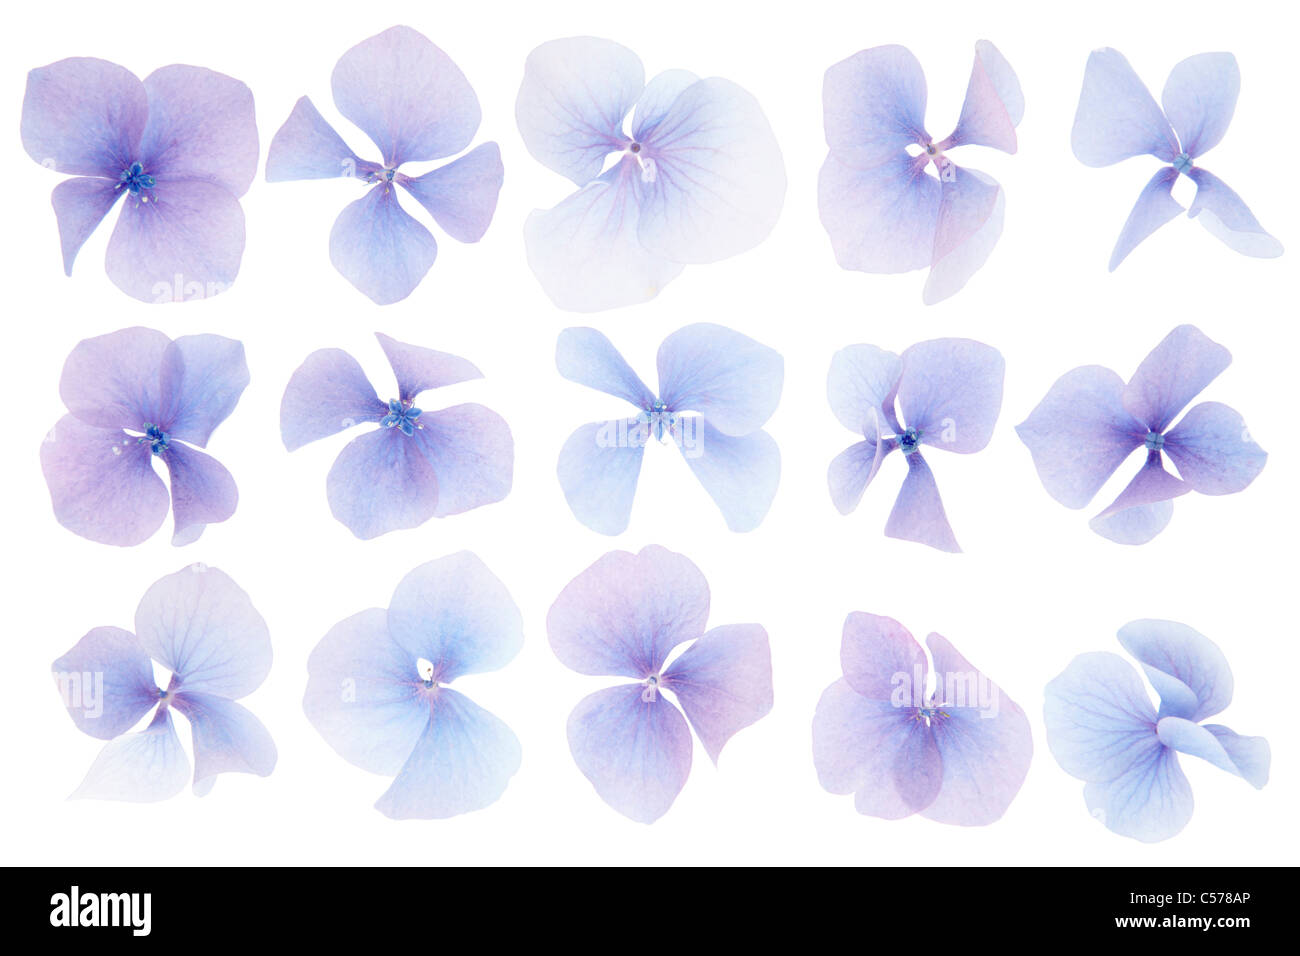 Dried Hydrangea Flowers Isolated Elements on White Background with Real  Shadow. Stock Image - Image of background, decorative: 128211621